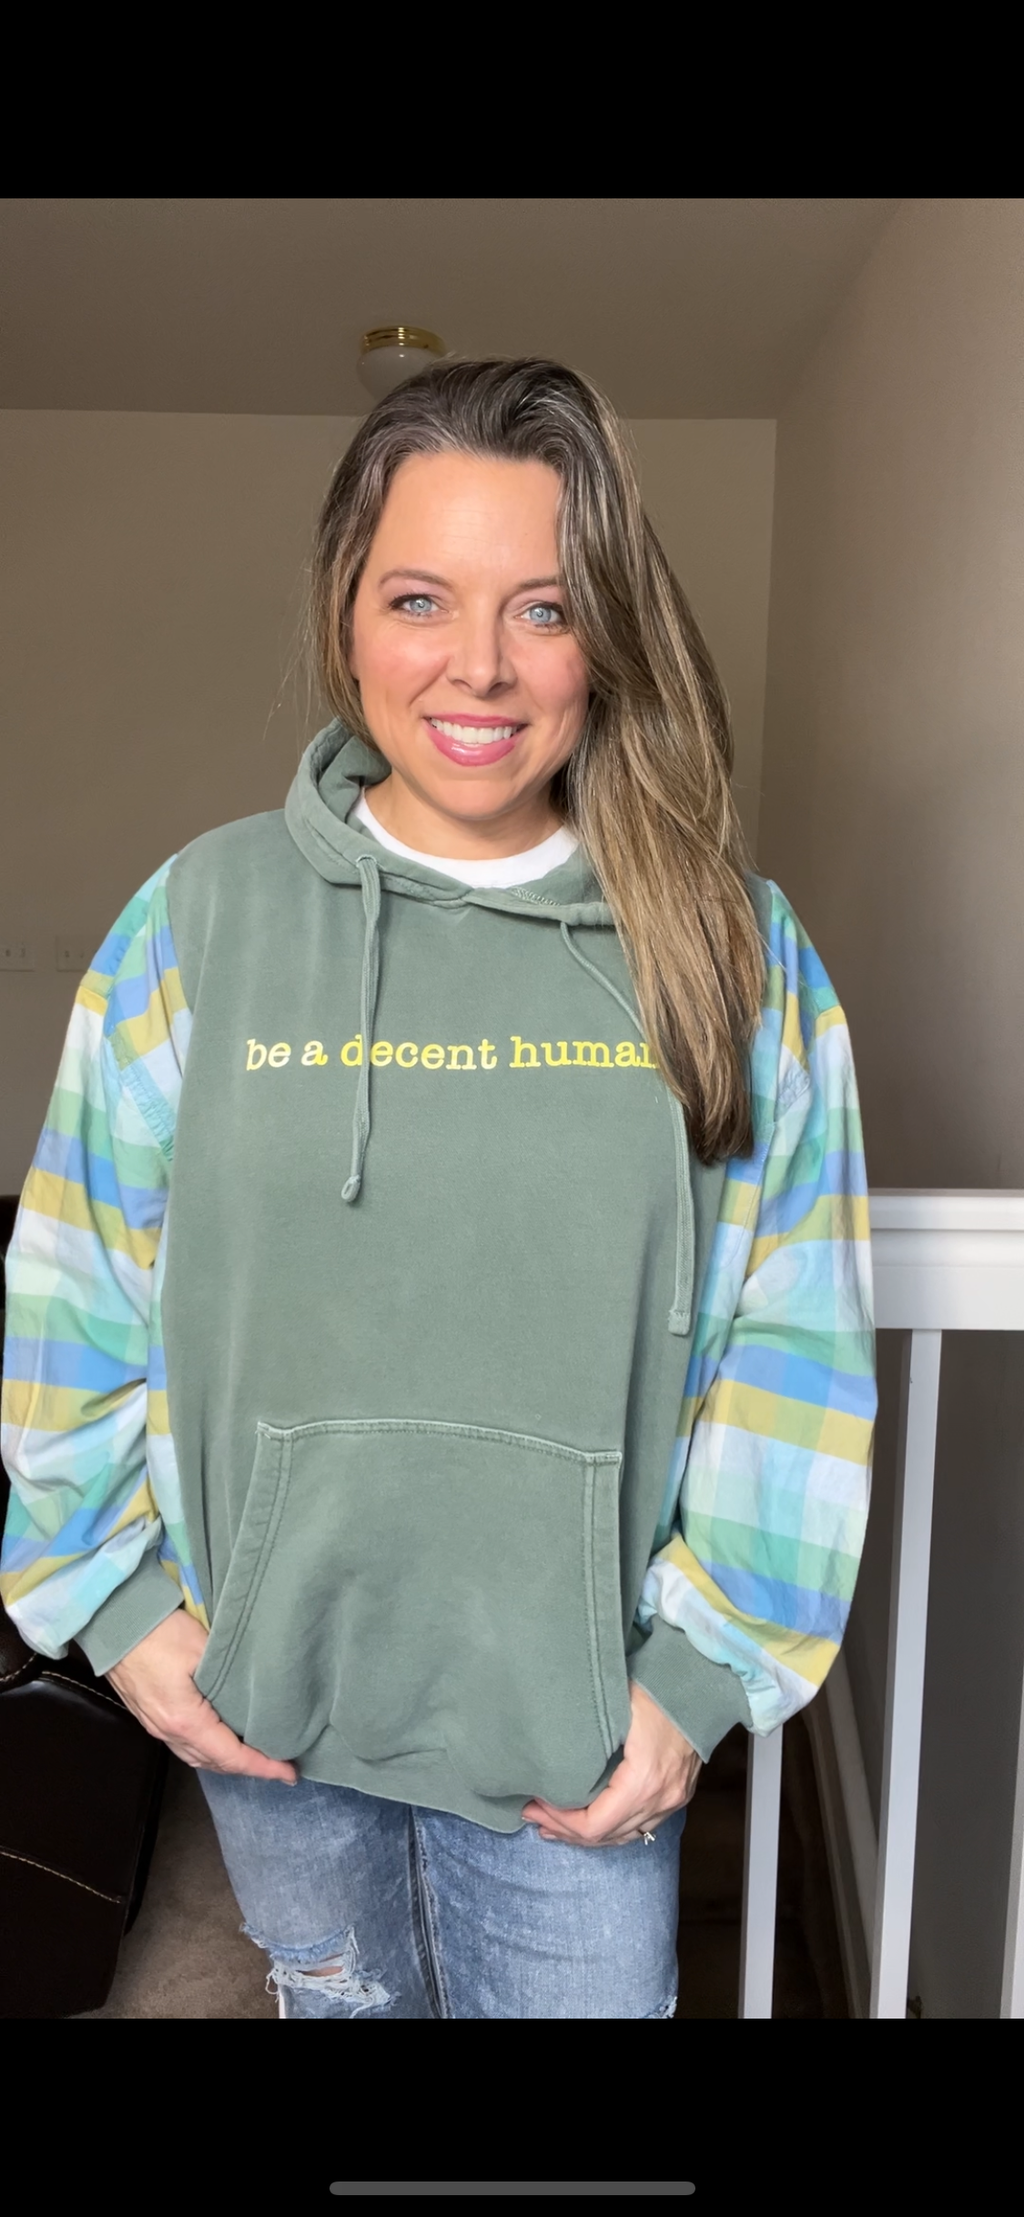 Upcycled Decent Human – women’s L/XL – midweight sweatshirt with soft, cotton sleeves￼